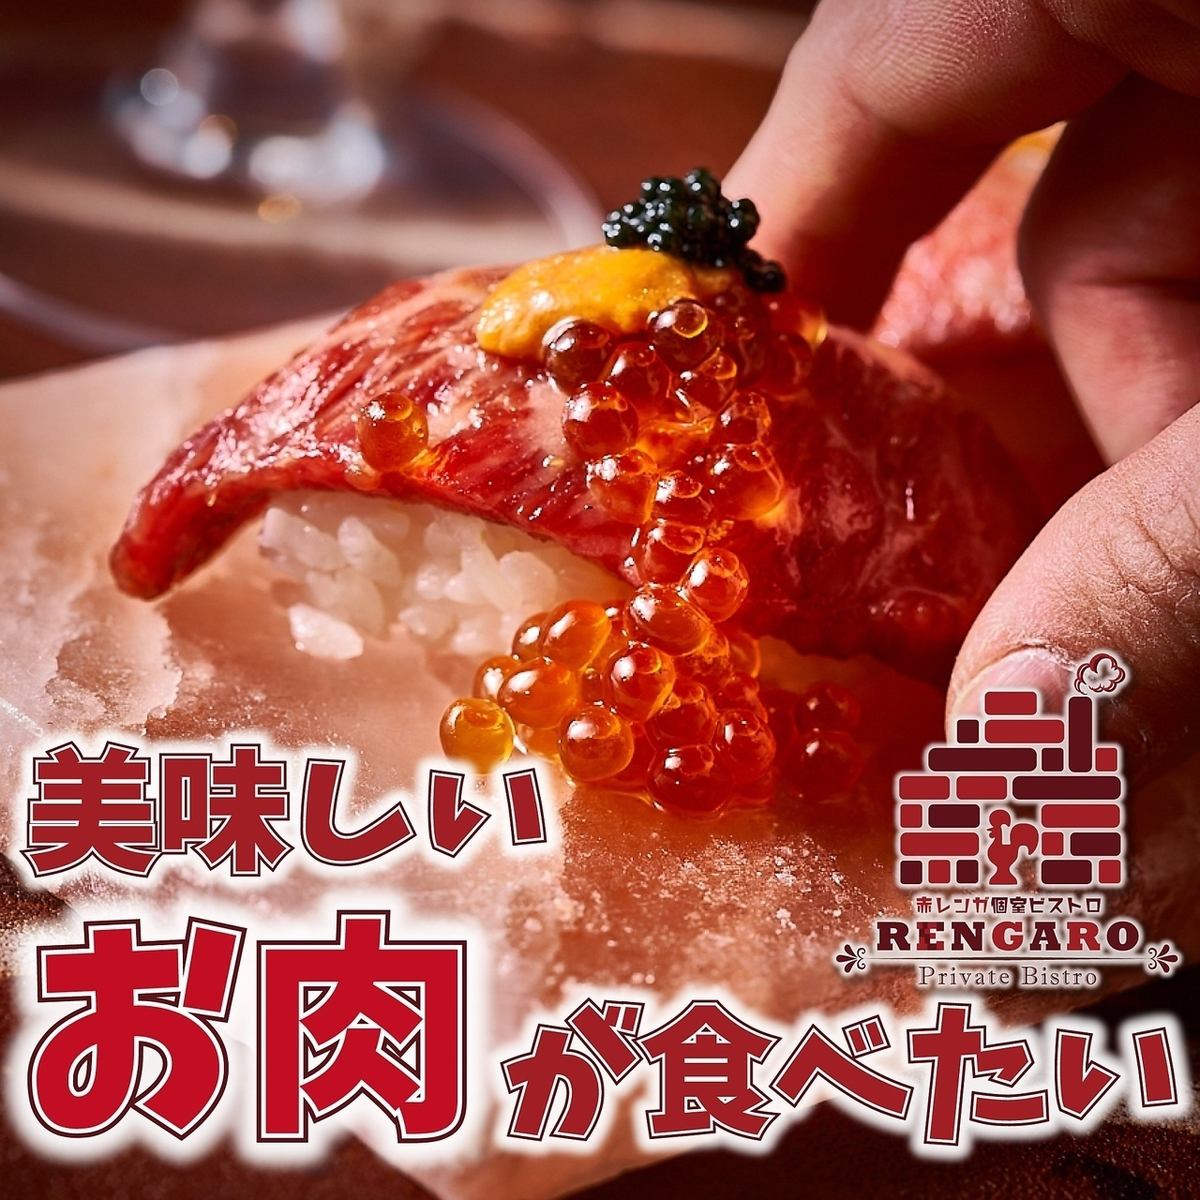 Reasonably priced luxurious meat ♪ We offer meat dishes using A4 Wagyu beef !!